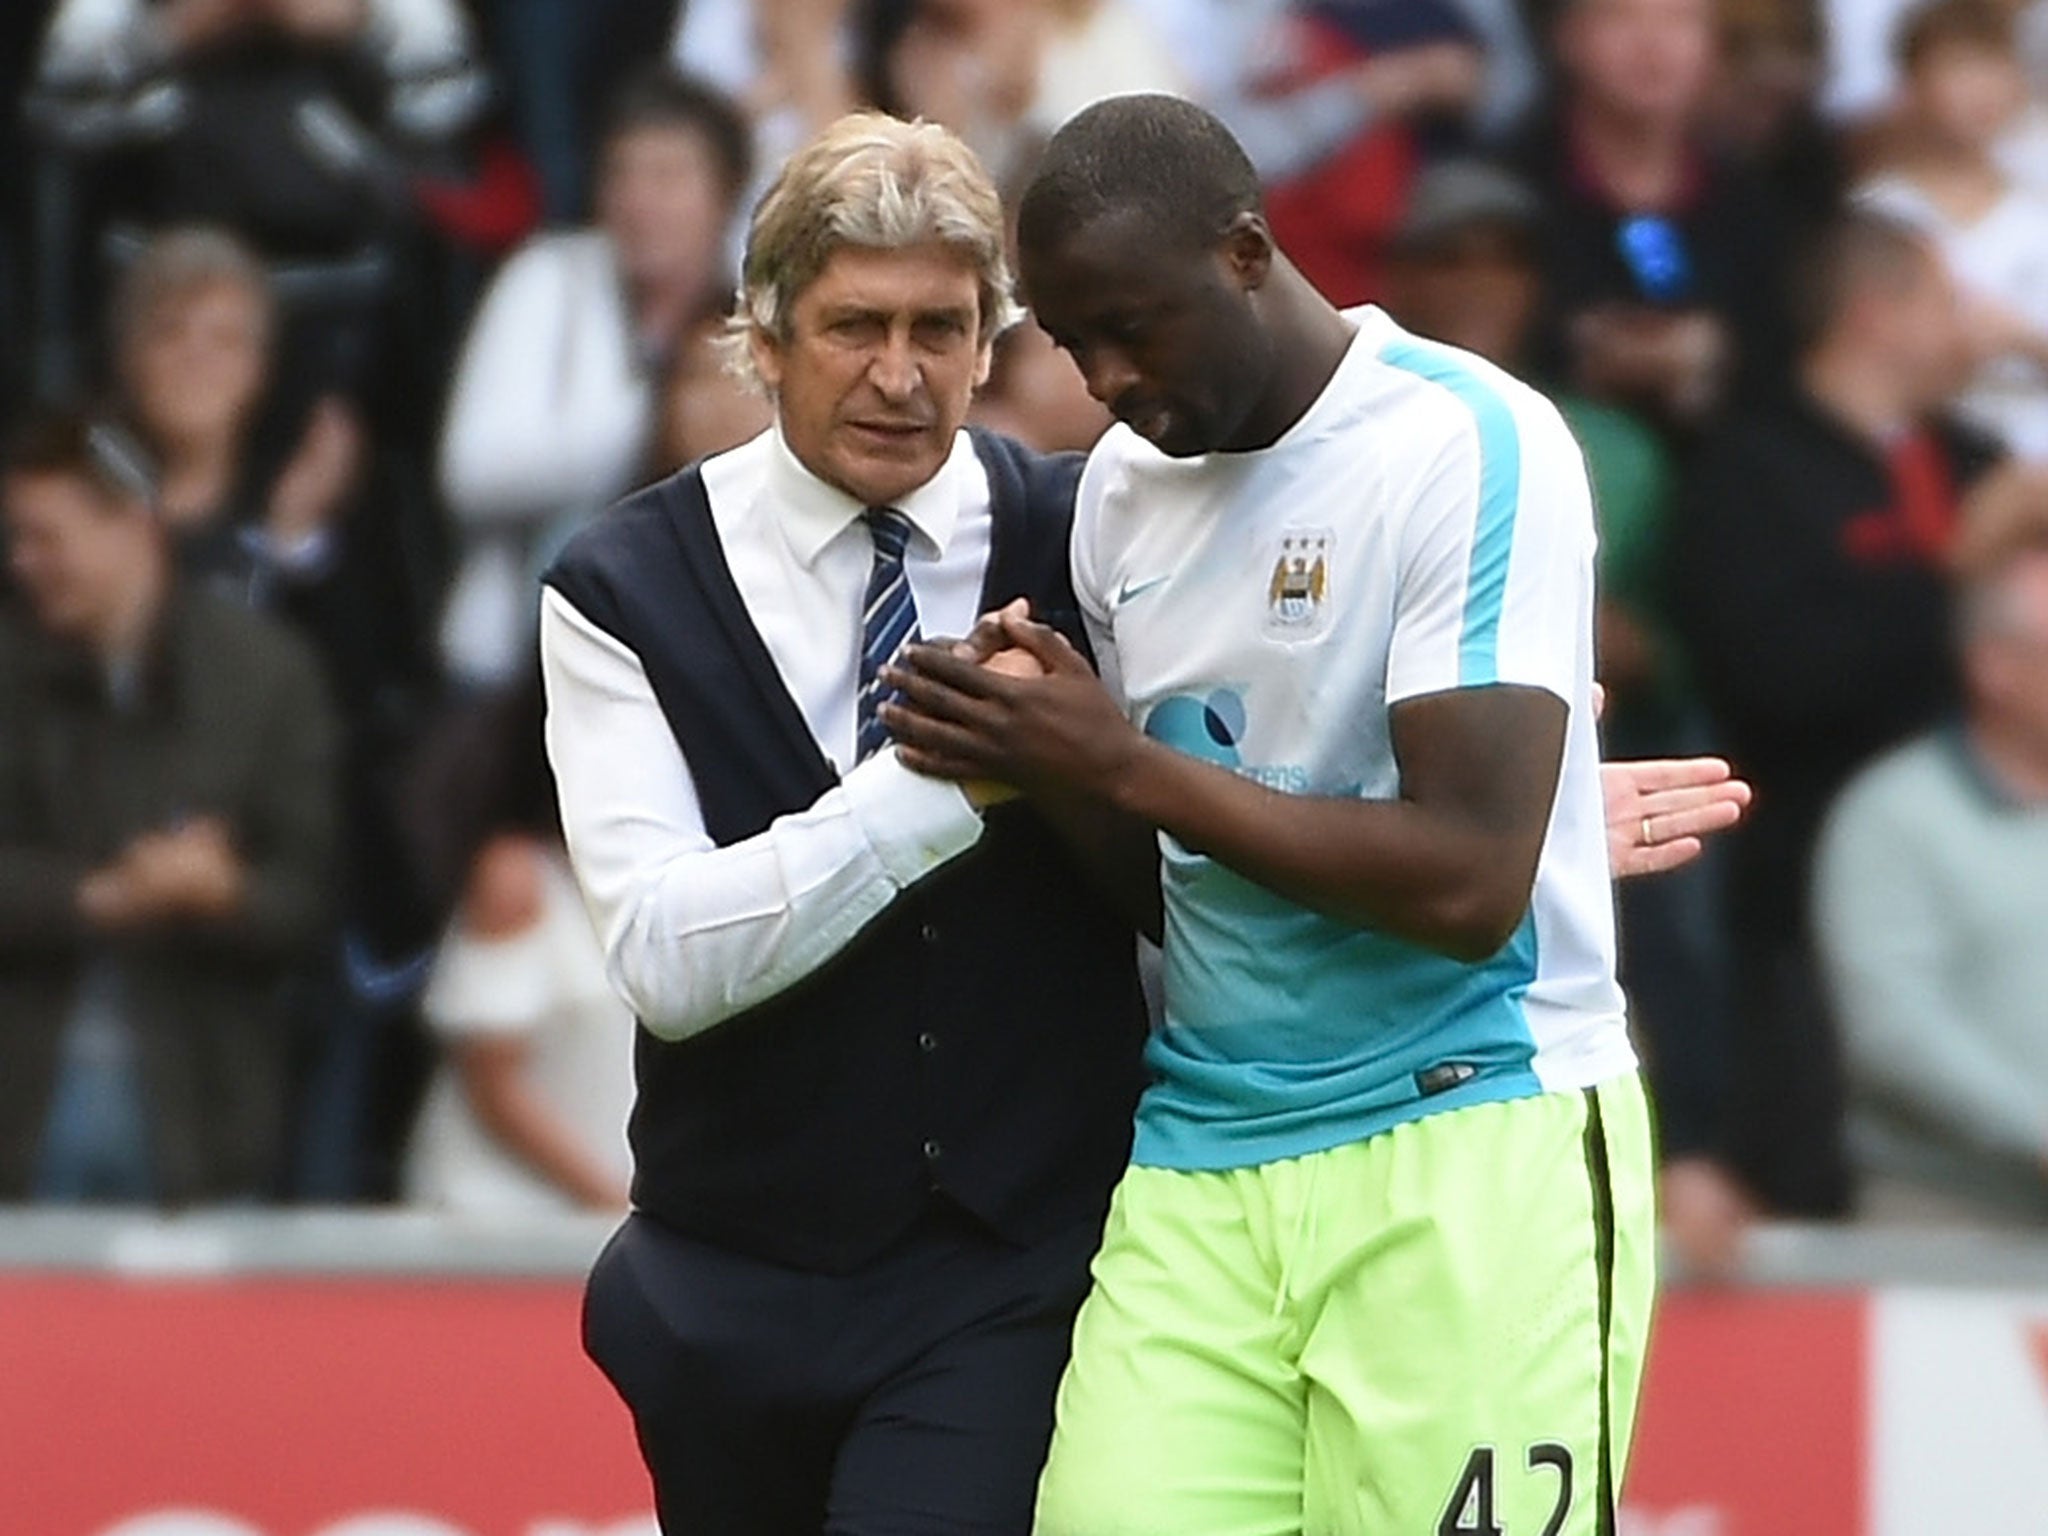 Manuel Pellegrini with Yaya Toure following his final game as Manchester City manager